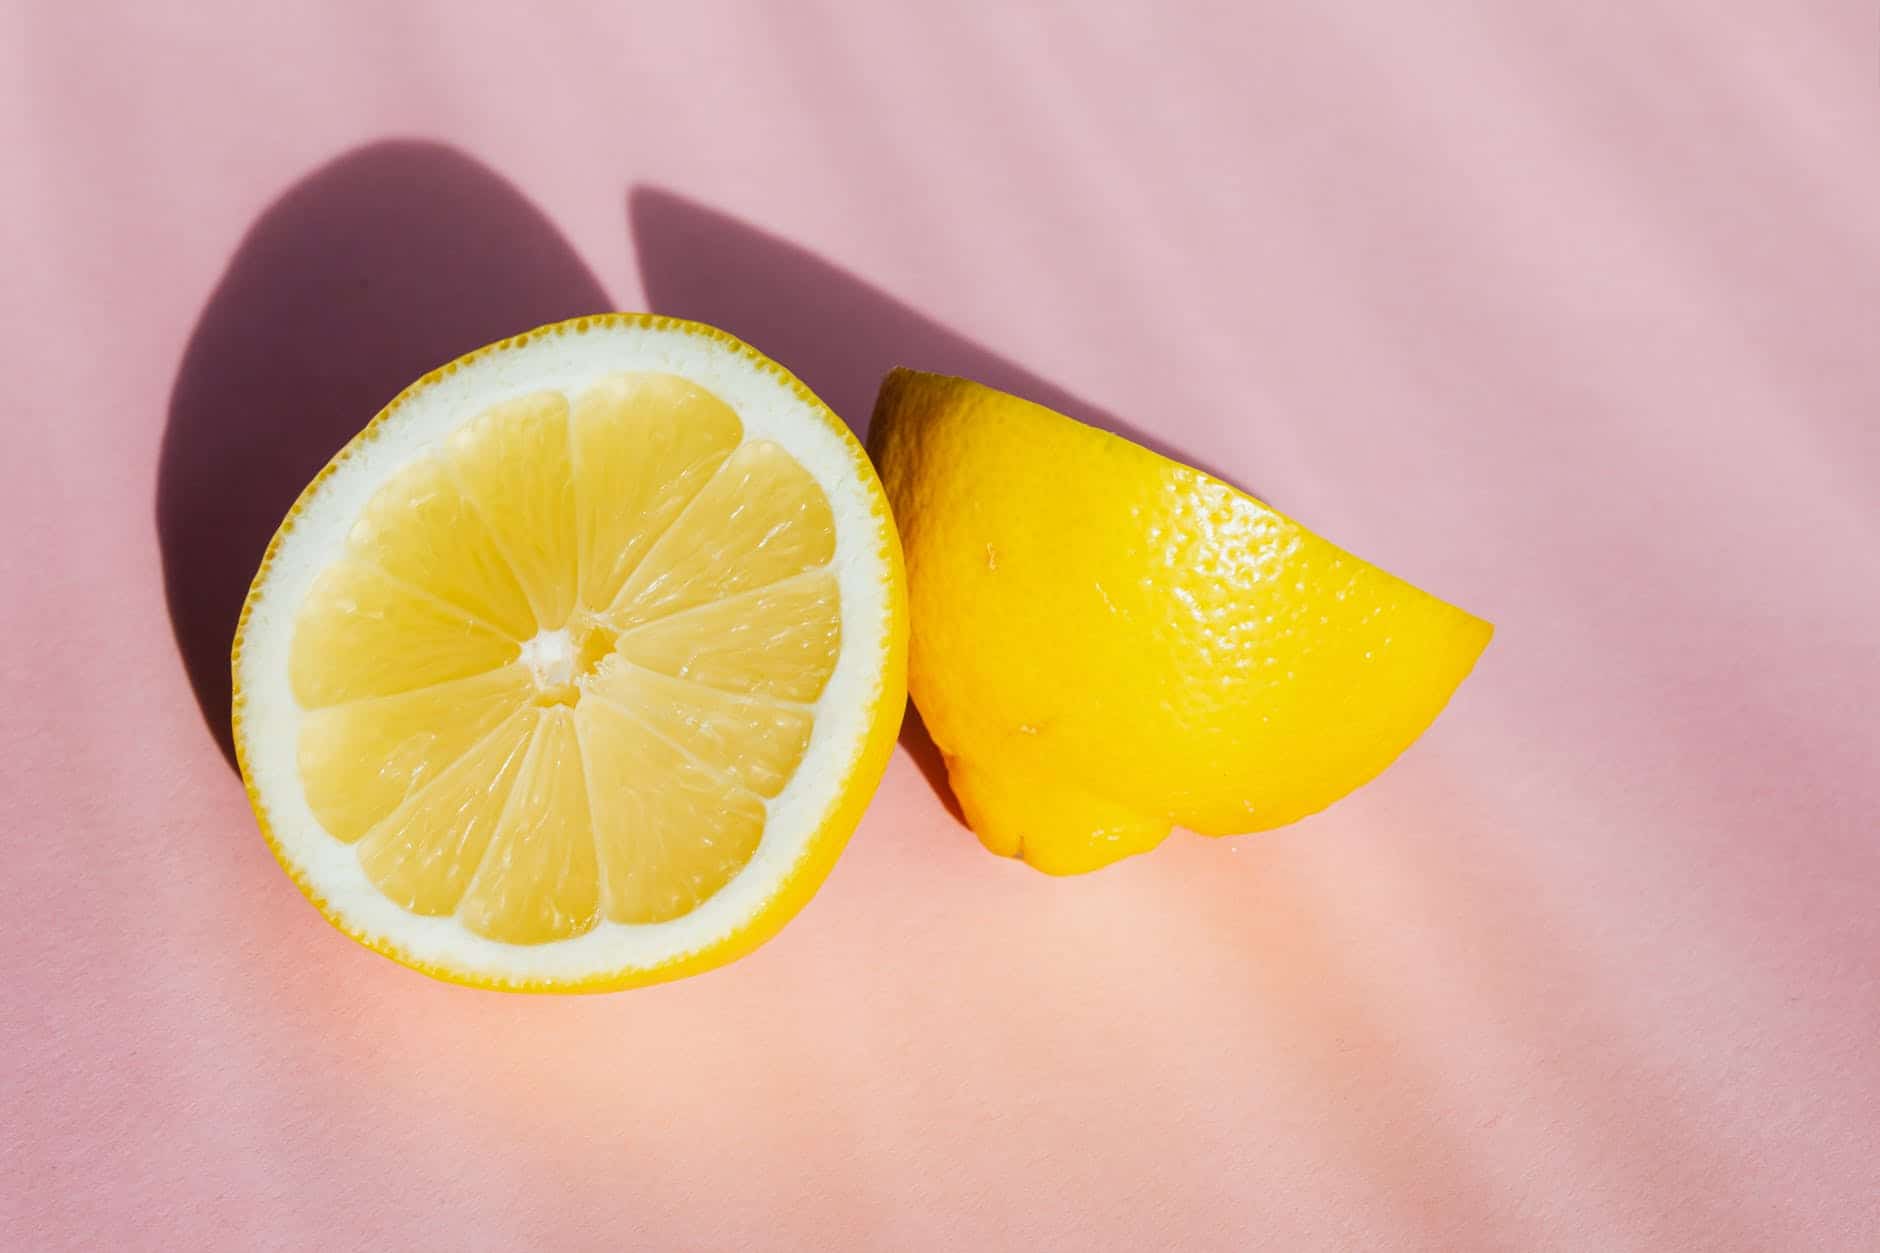 sliced pieces of lemon on pink surface